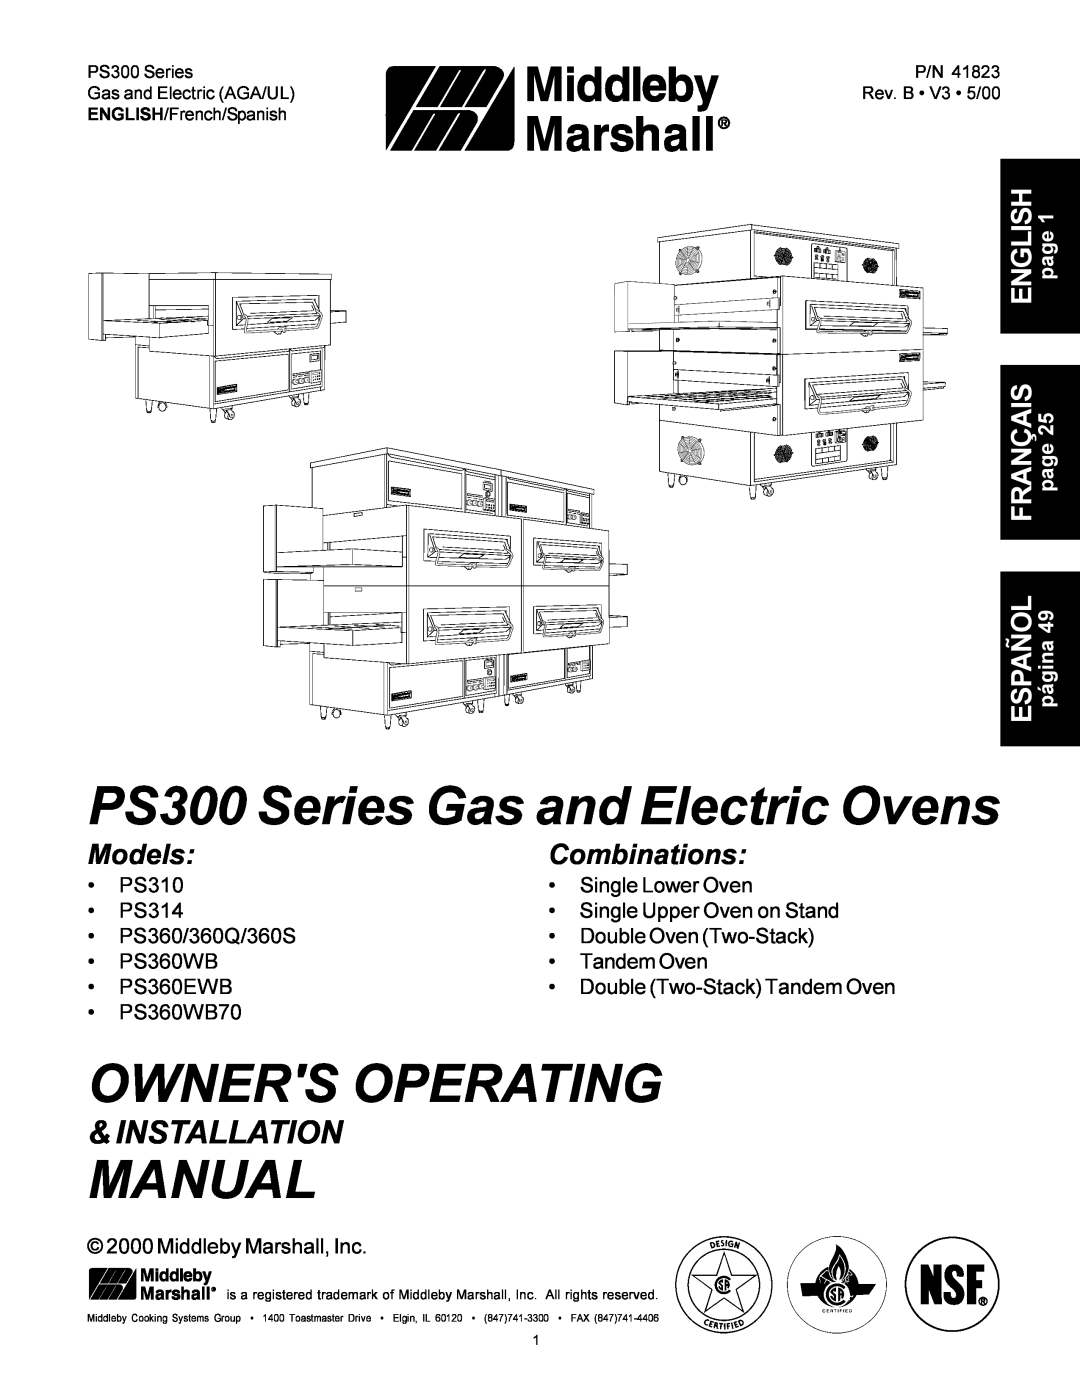 Middleby Marshall PS360, PS570, PS200, PS555, PS220, PS224 PS310 manual 